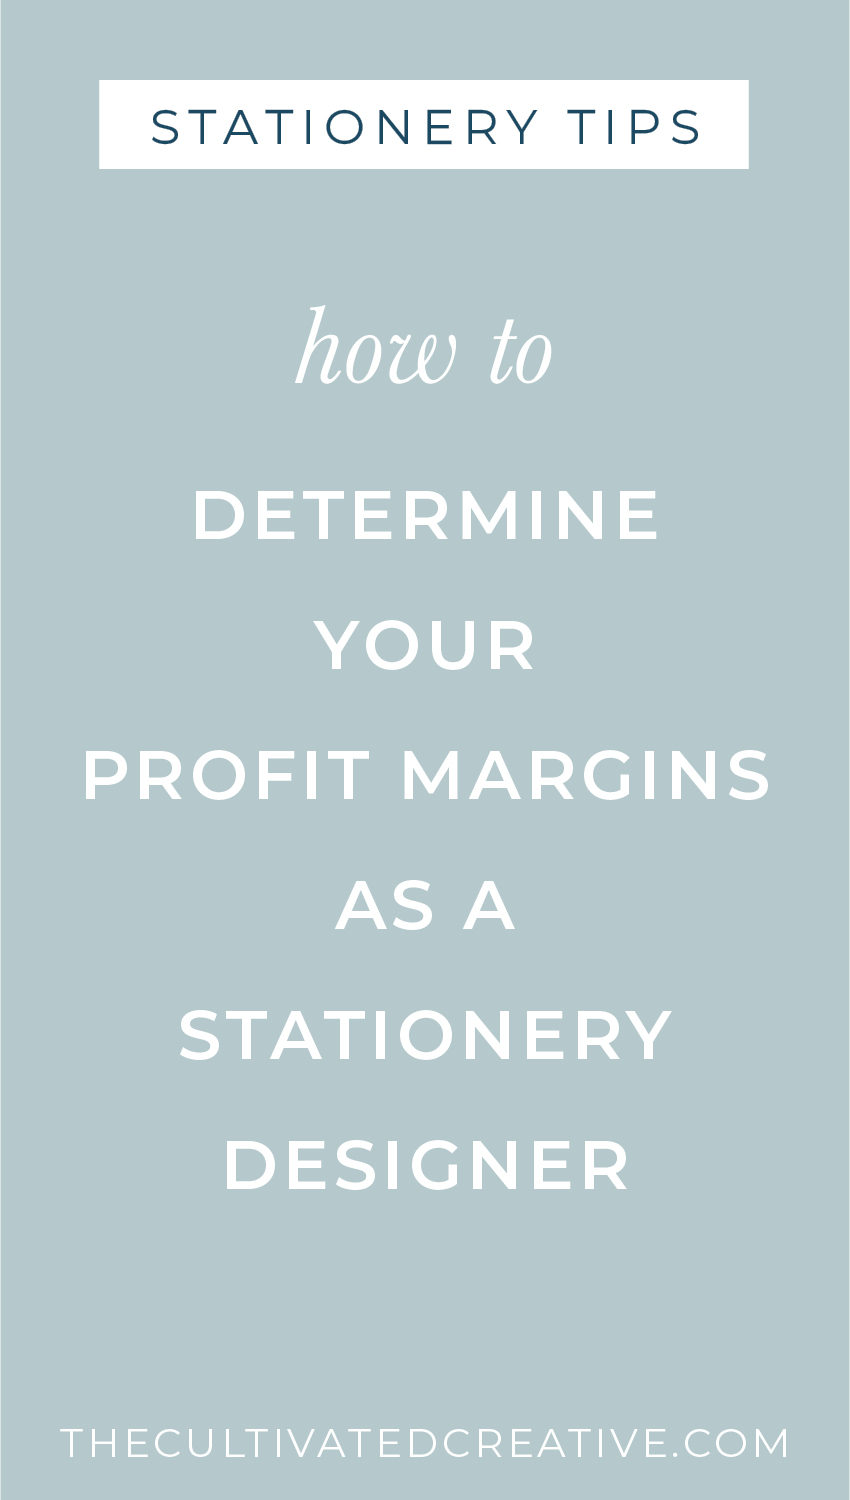 How to determine your profit margins as a stationery designer